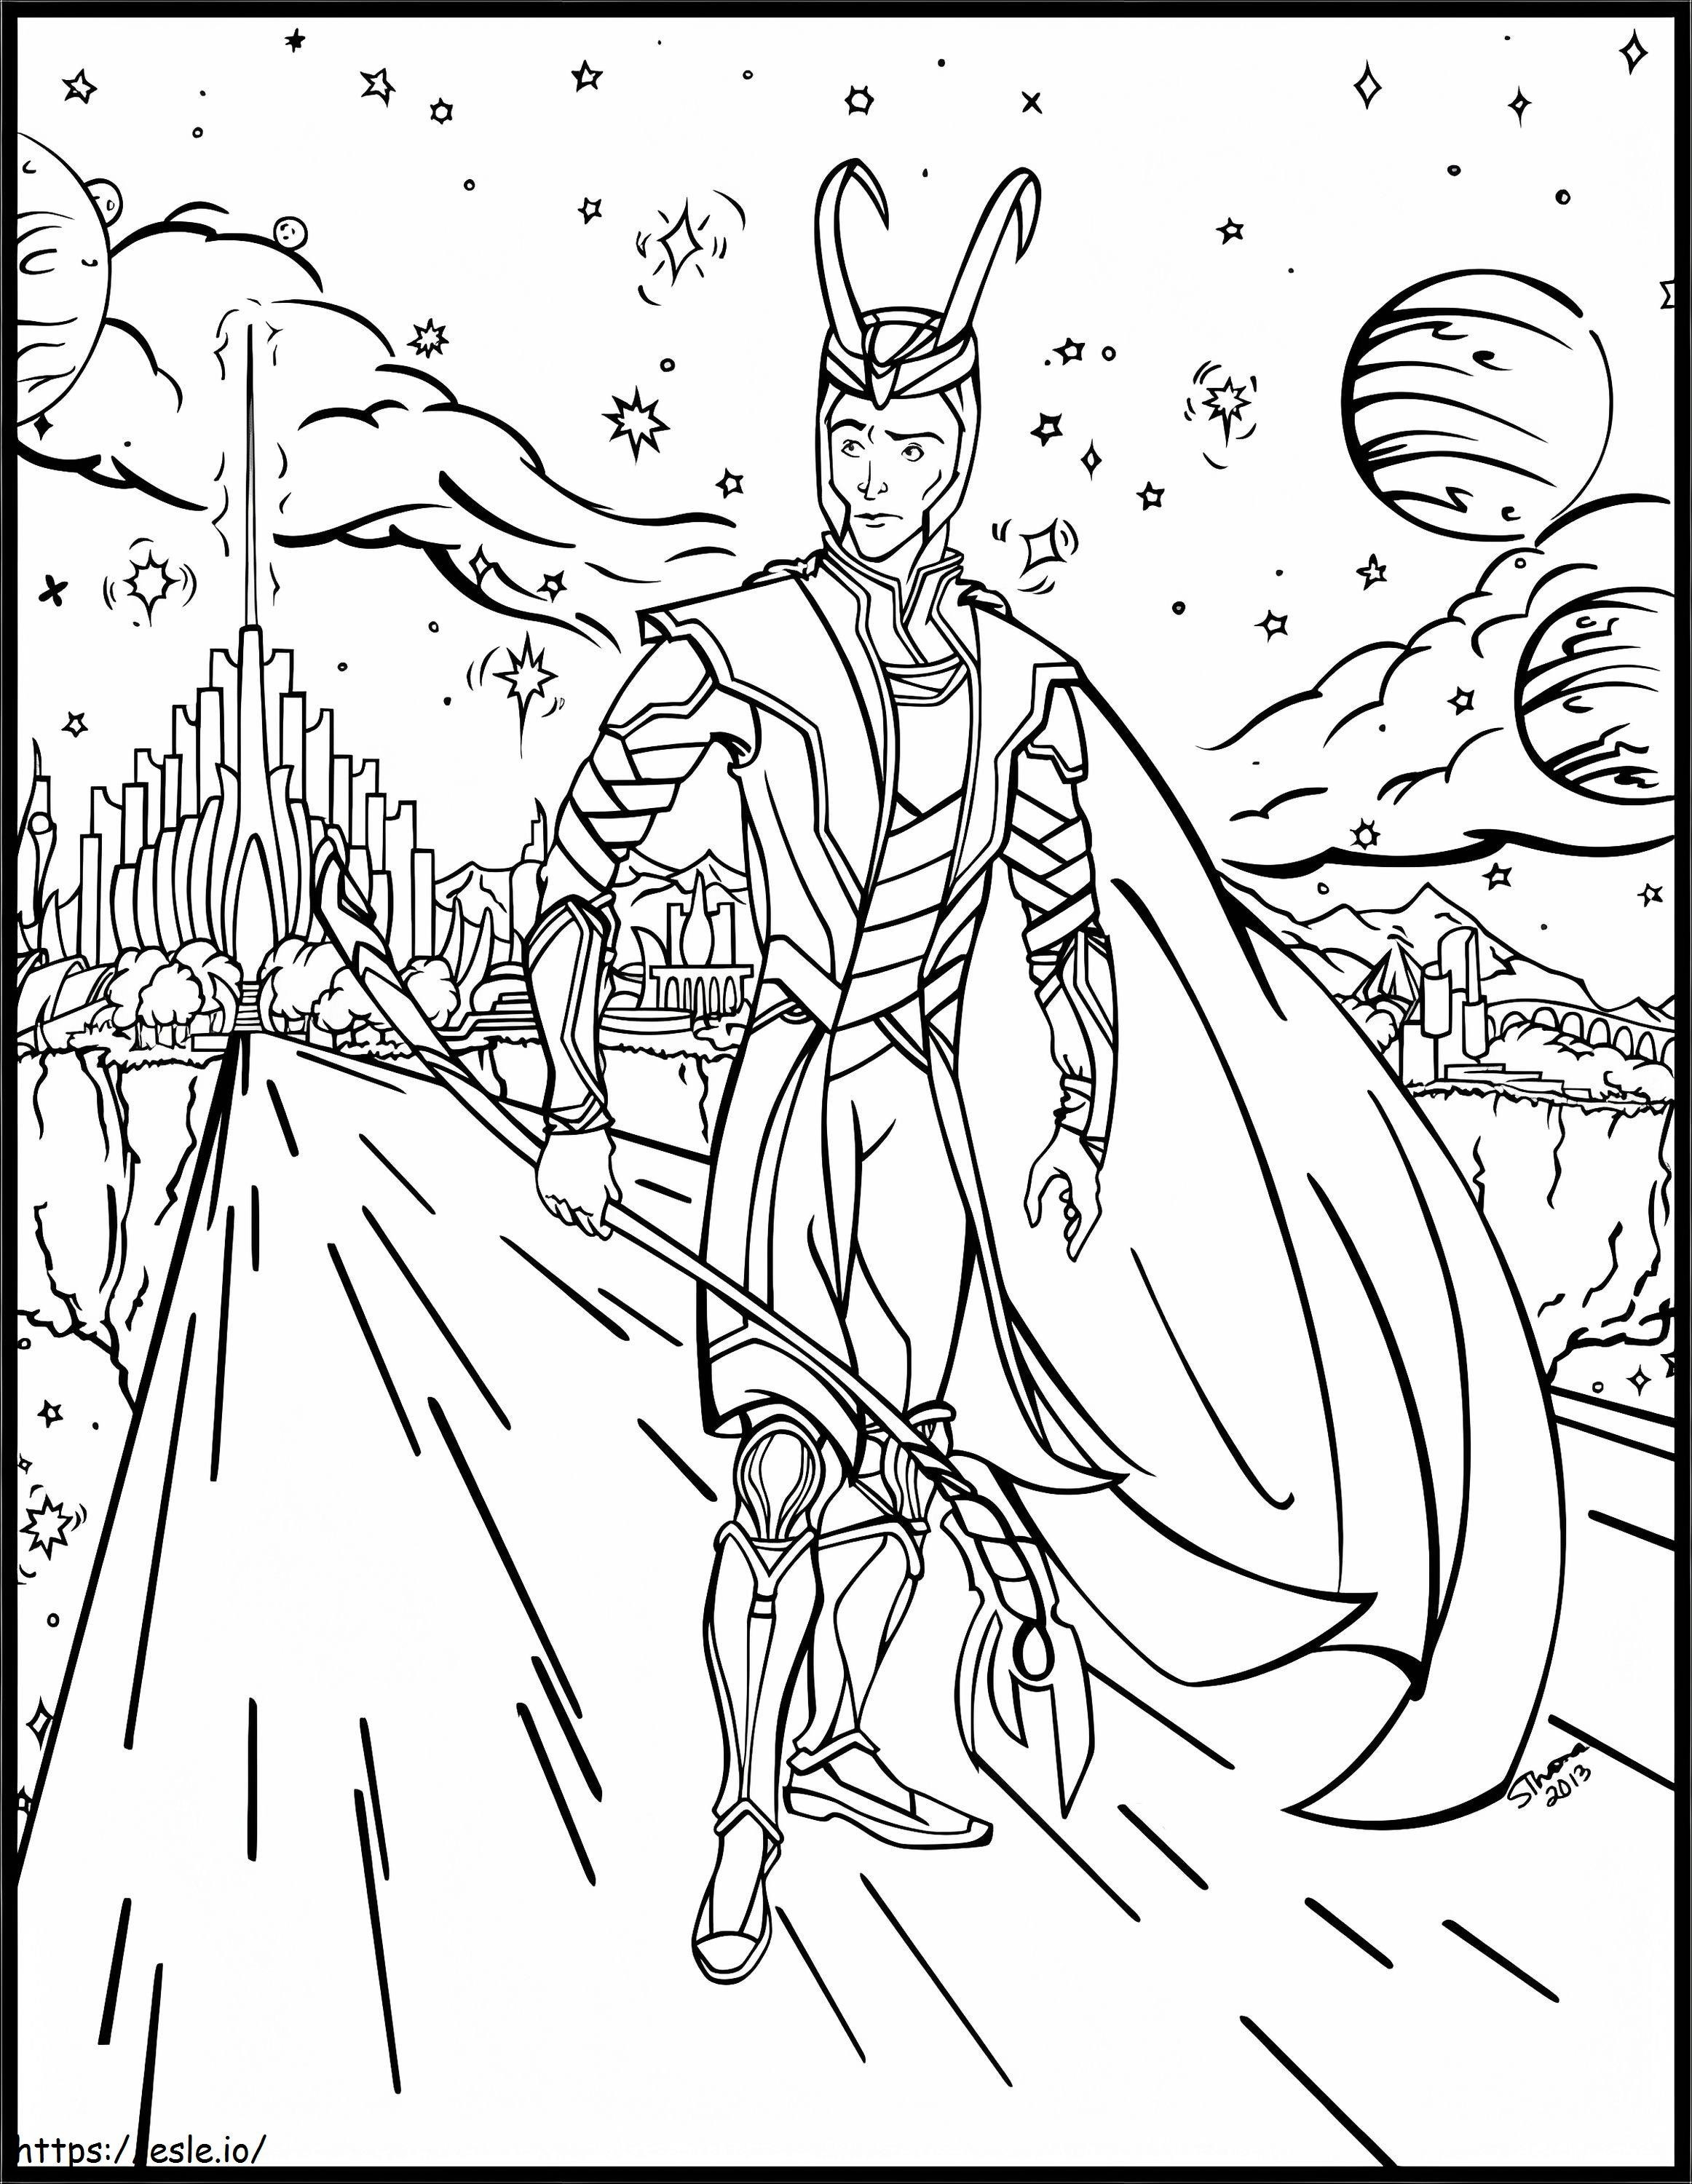 Loki On Bifrost coloring page